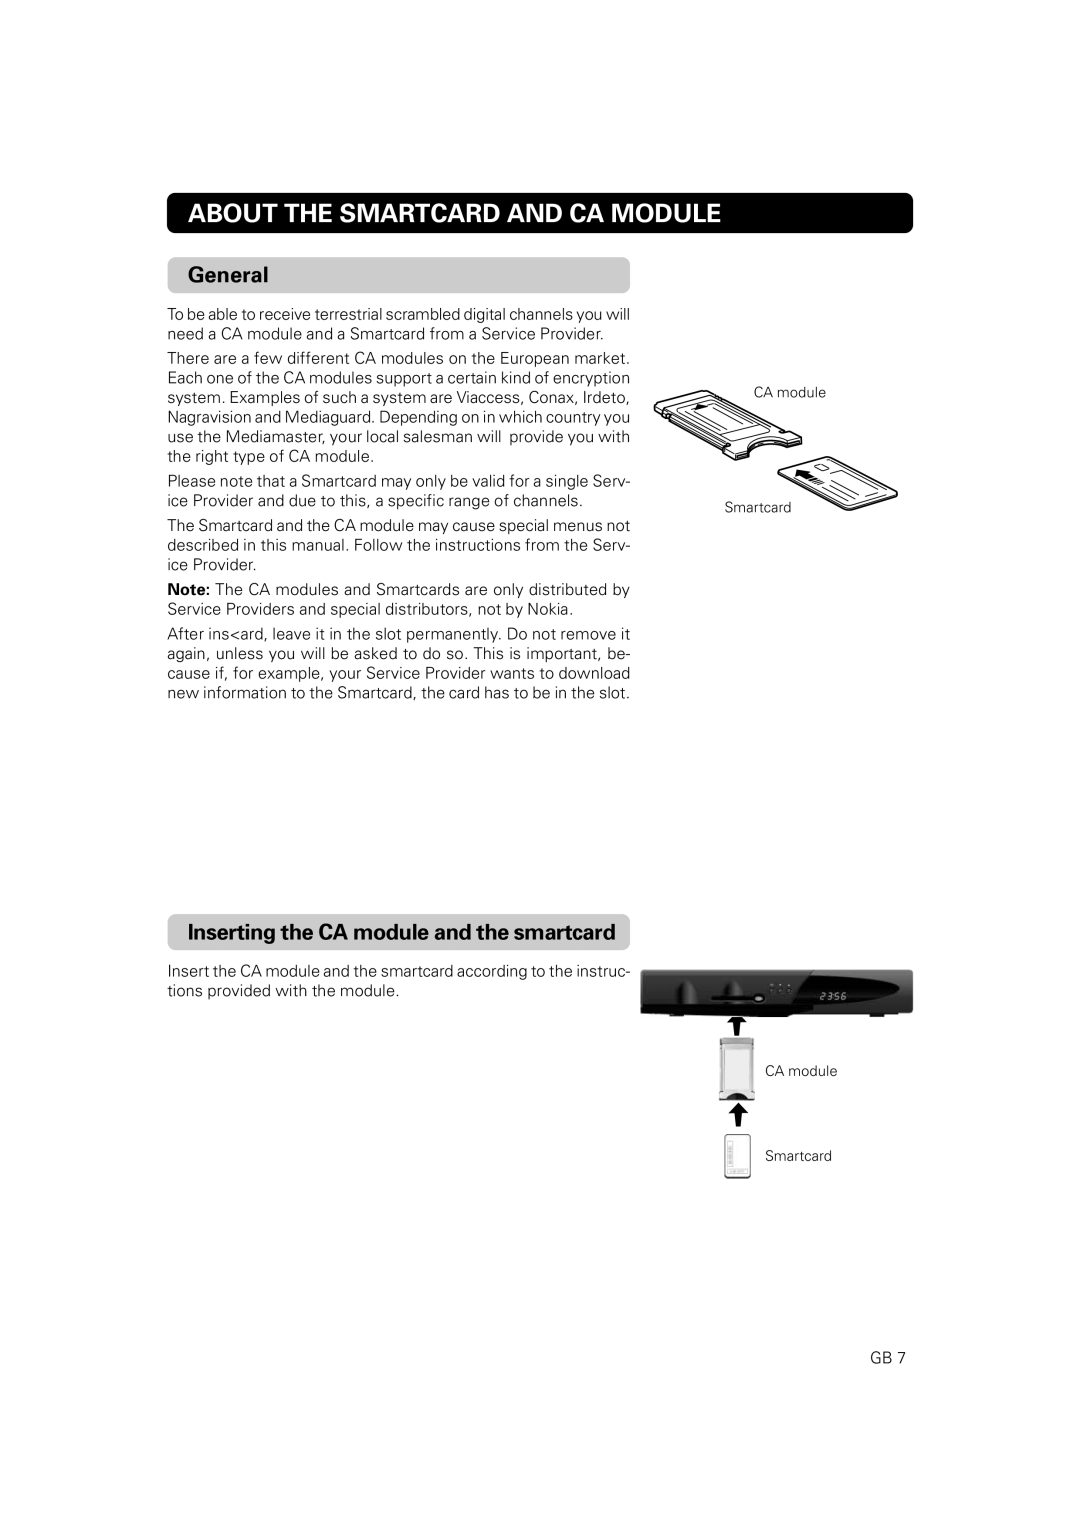 Nokia 9828 owner manual About The Smartcard And Ca Module, General, Inserting the CA module and the smartcard 